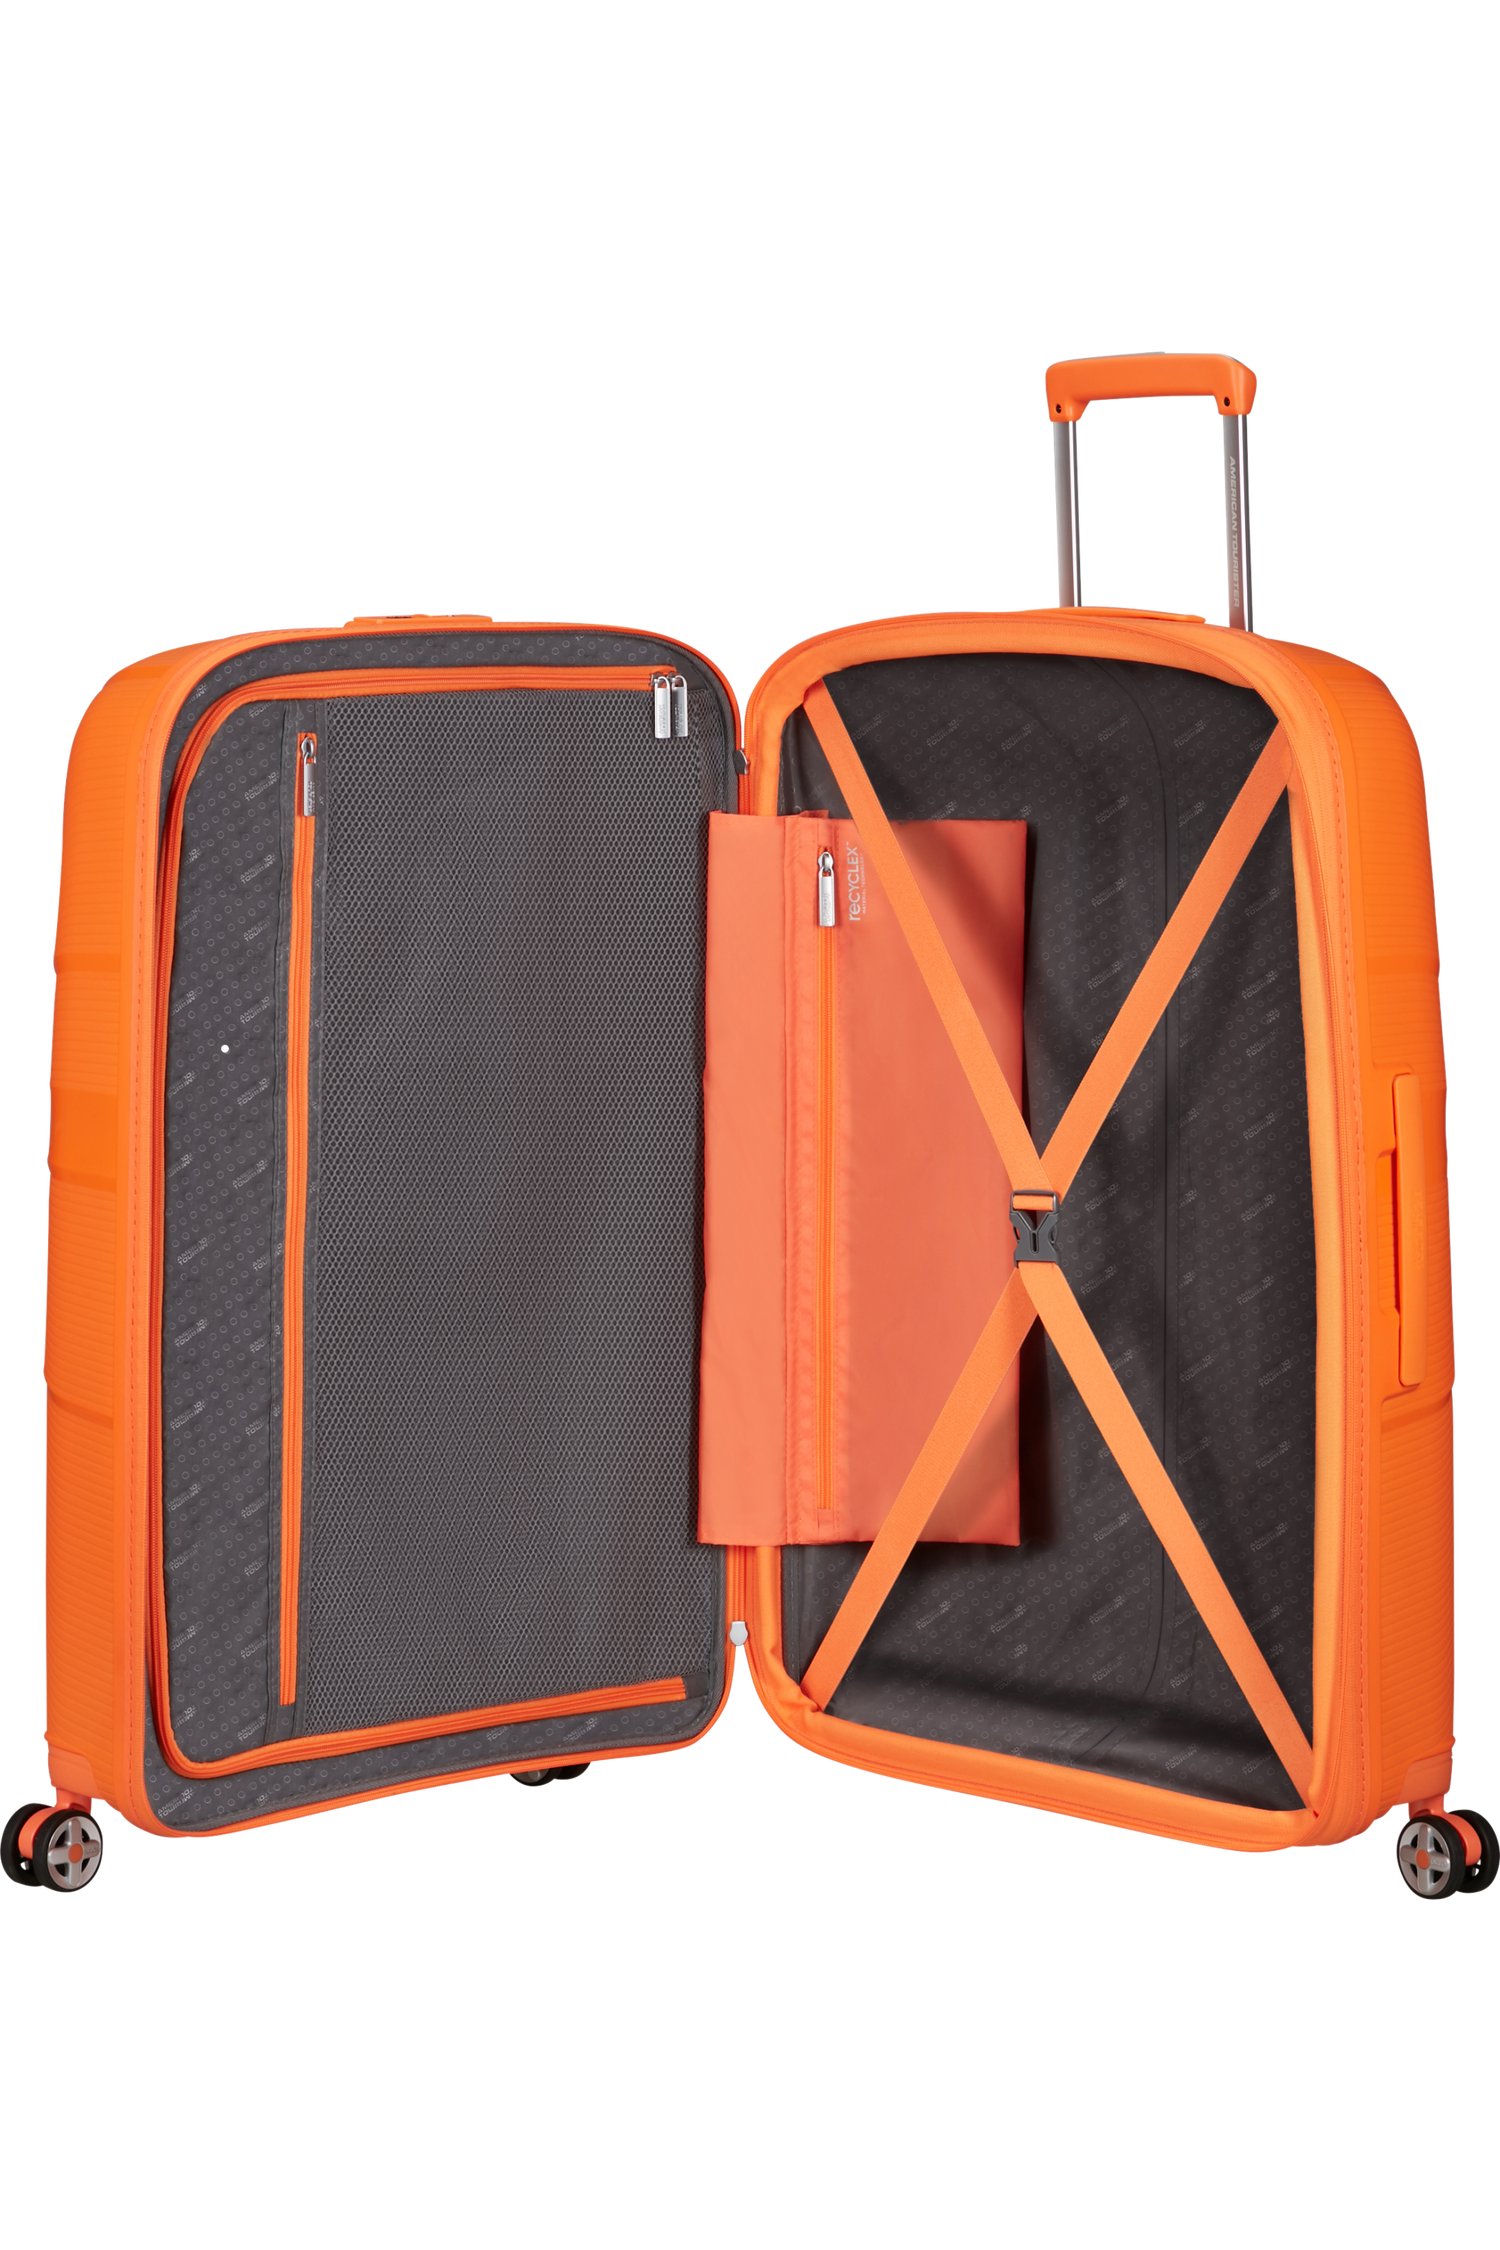 StarVibe 3 Piece Luggage Sets